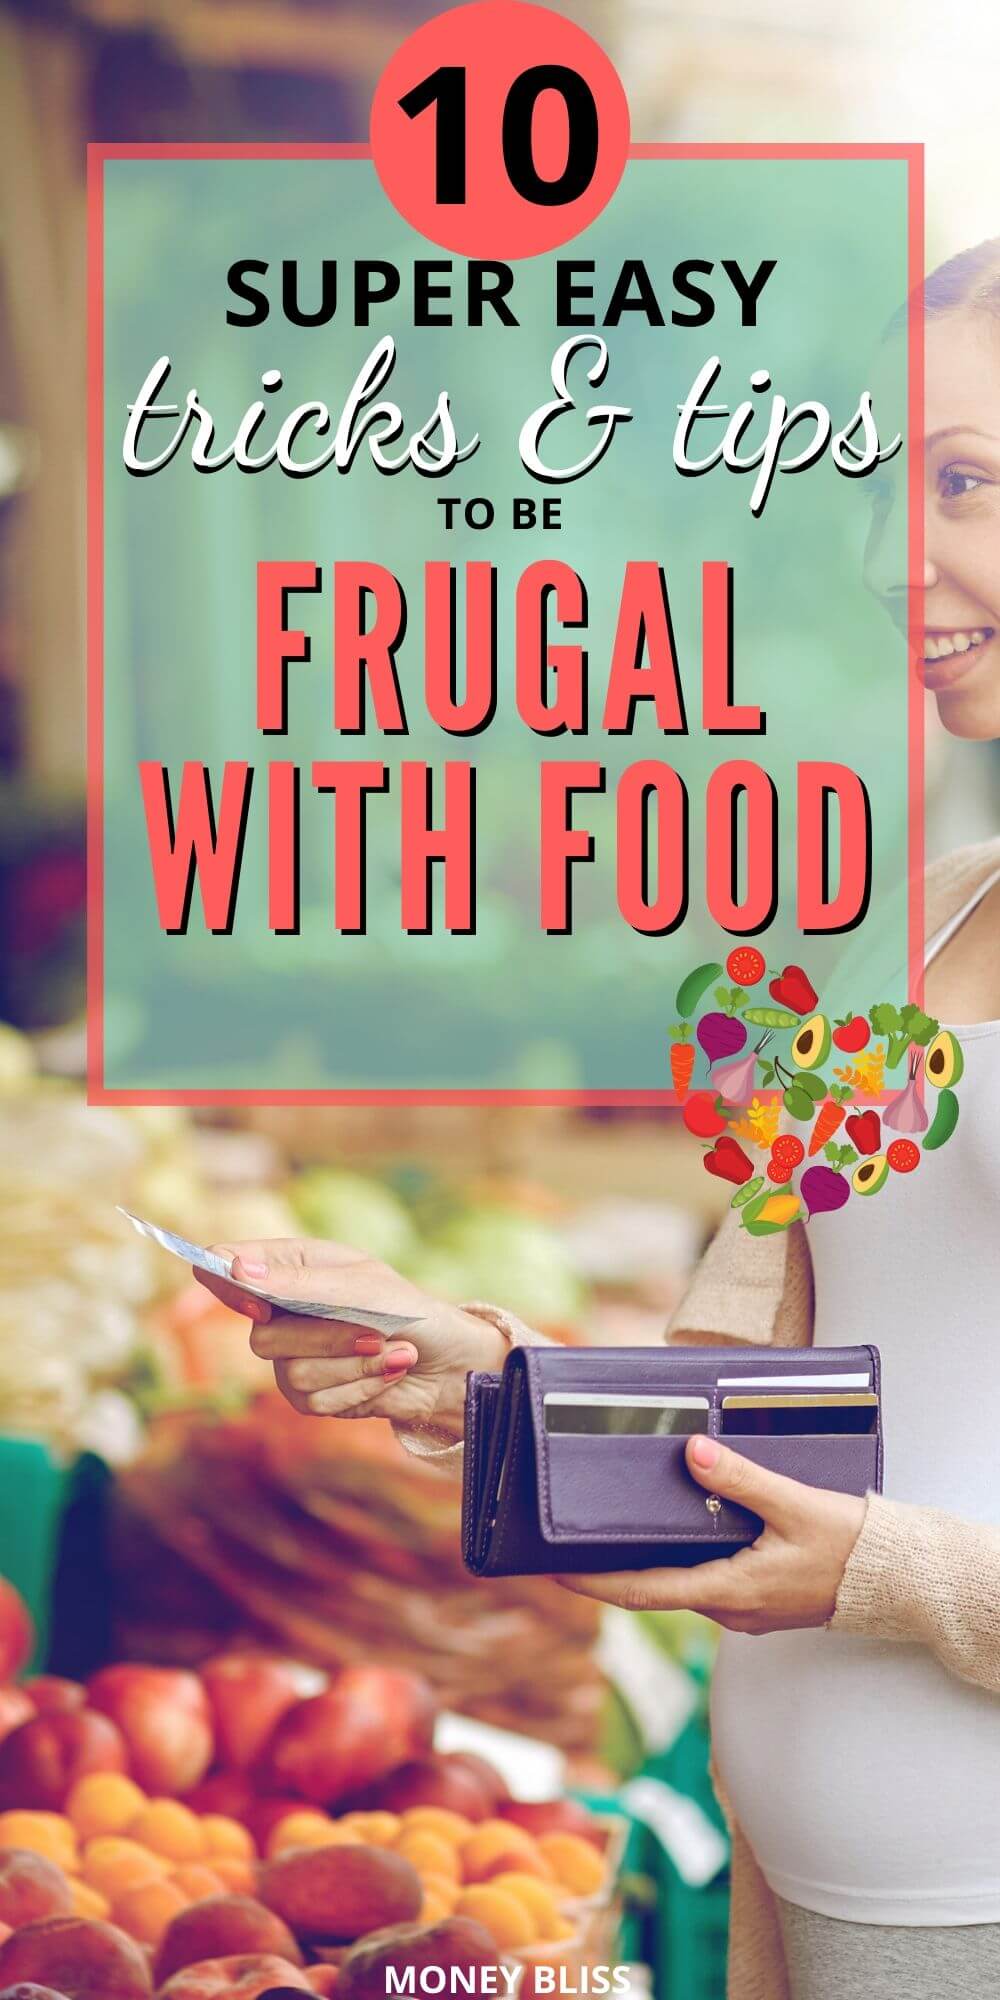 One of the best frugal living tips happens with your groceries budget. This is the perfect place for frugal living for beginners. Start with being frugal with food. Cooking healthy meals will be your new nomral. Start saving money with these simple ideas!